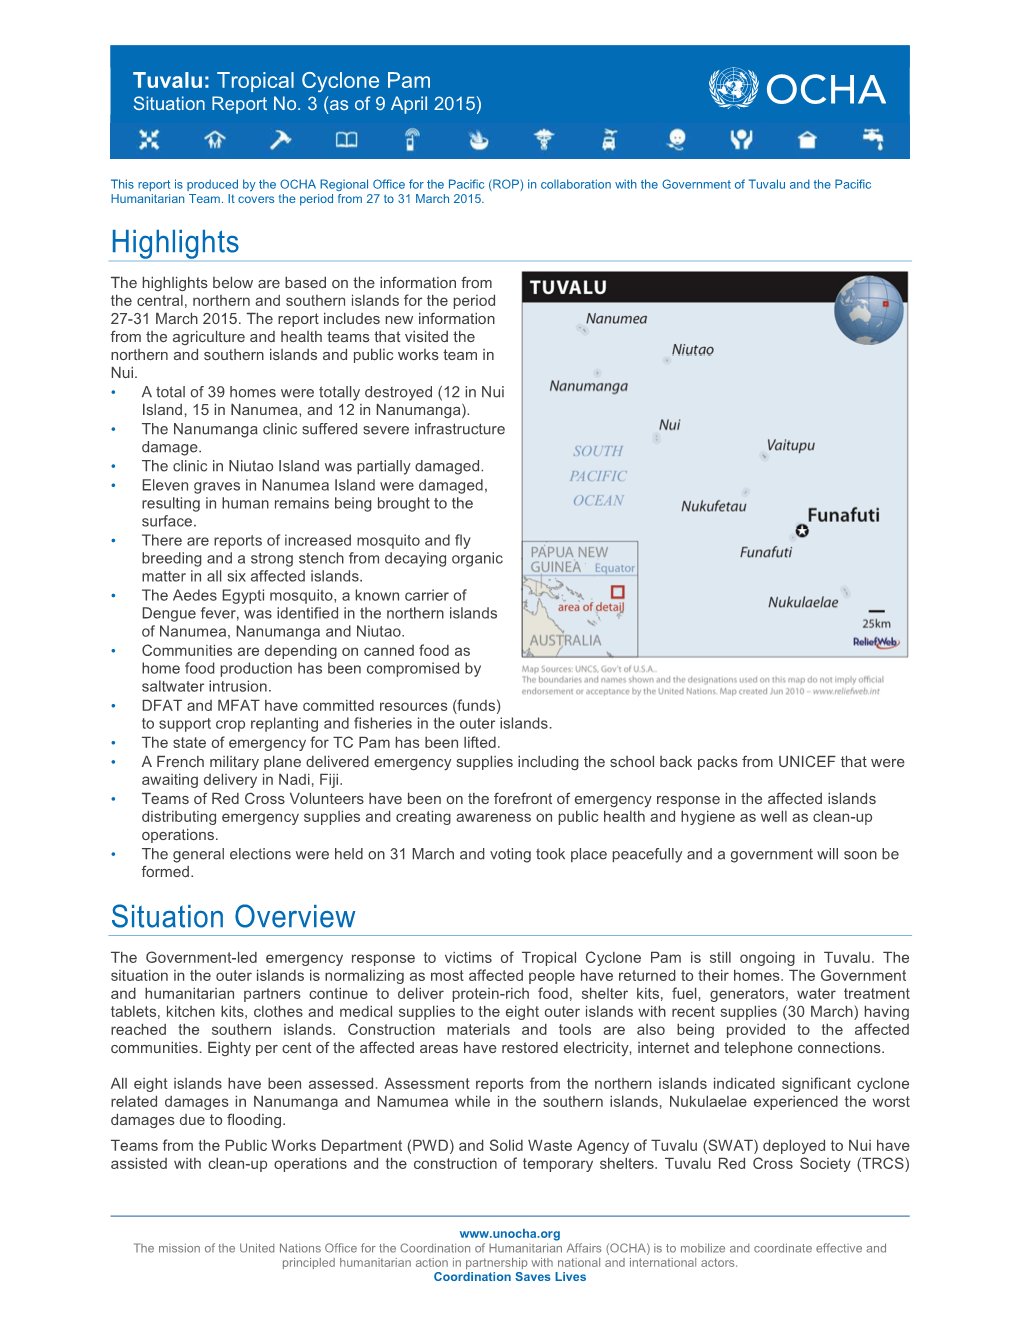 Tuvalu Tropical Cyclone Pam Situation Report No. 3.Pdf